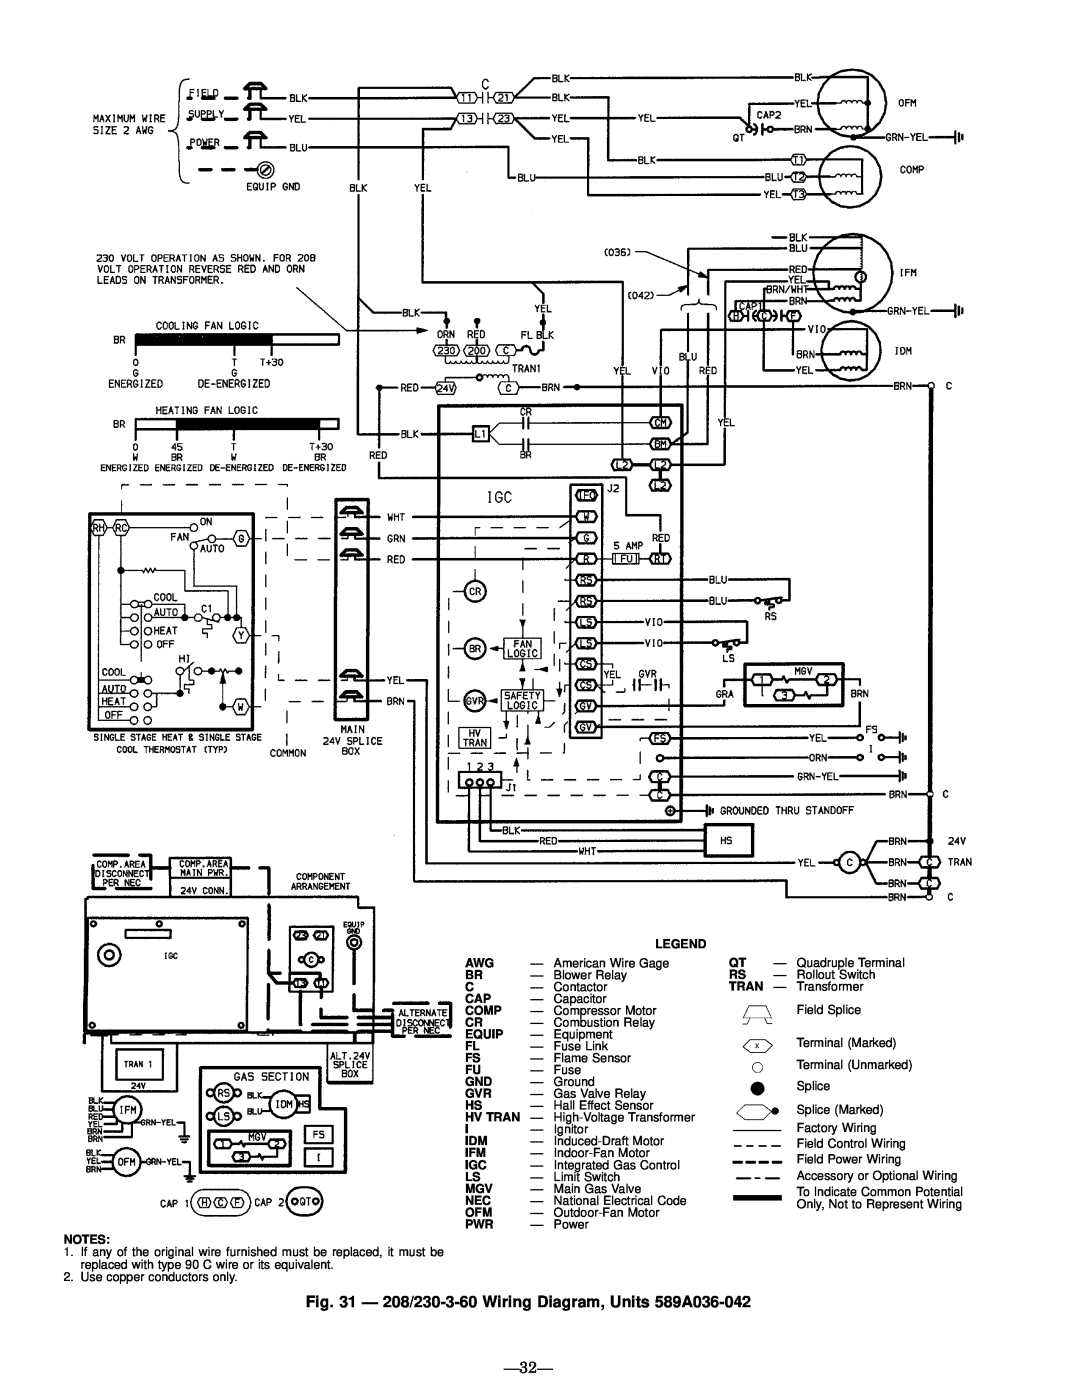 Typical Field Wiring - Bryant 588A User Manual [Page 22]